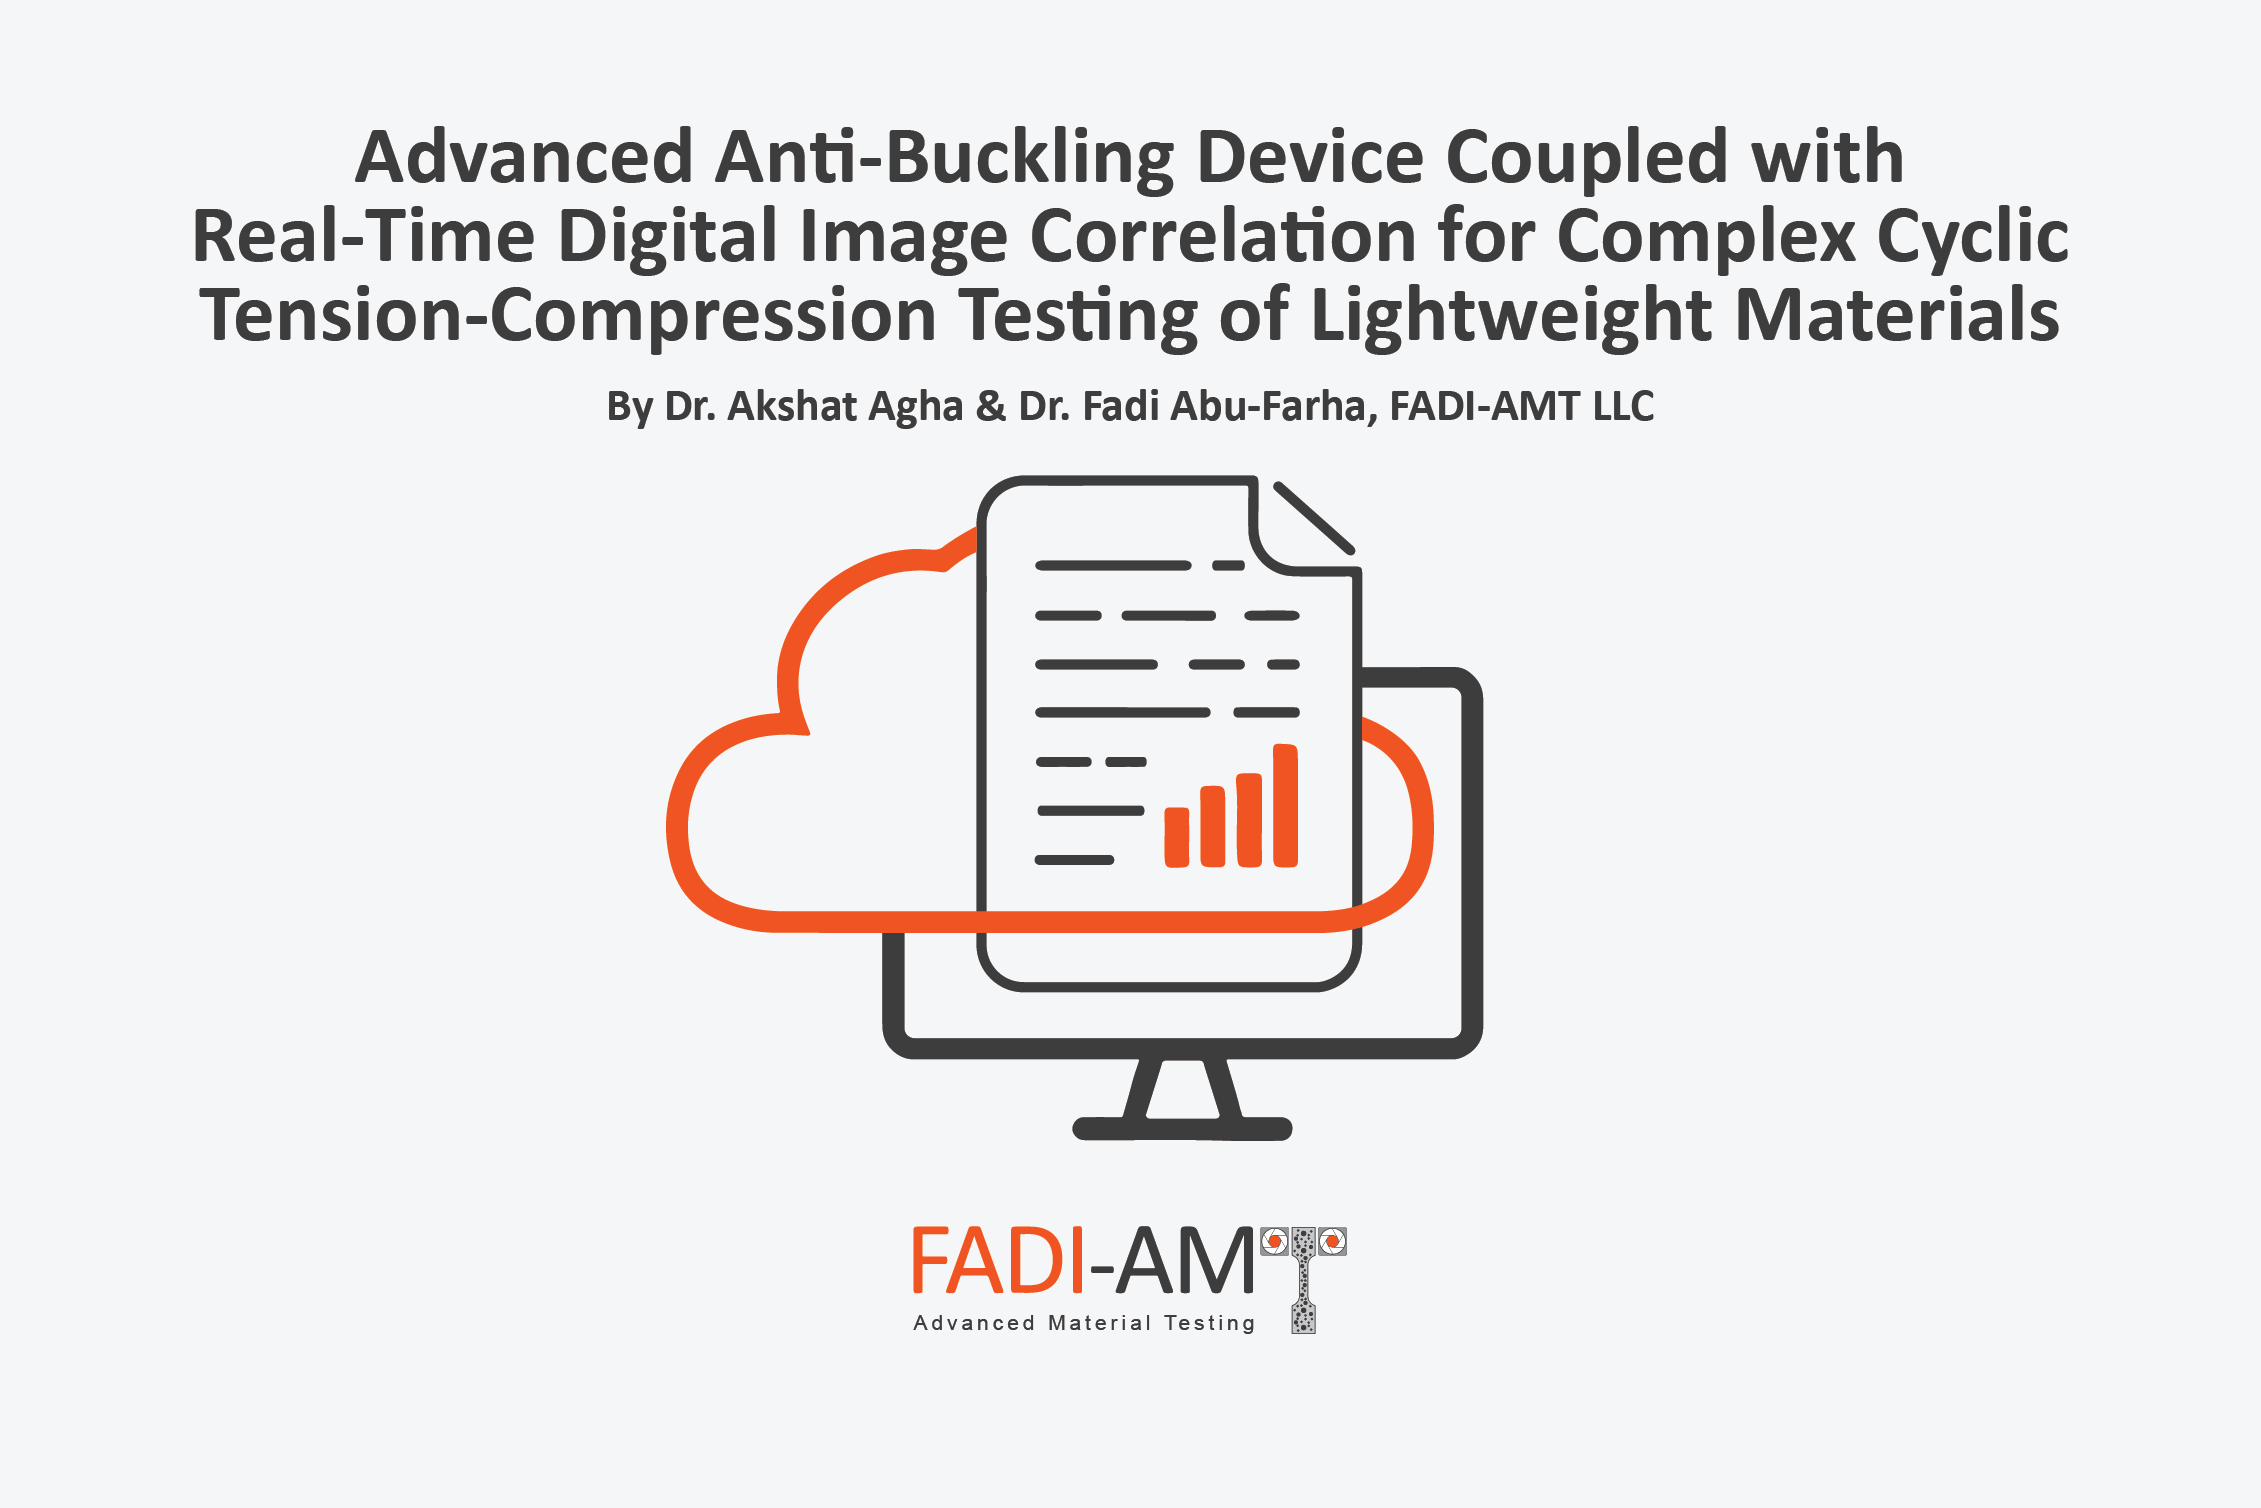 Advanced Anti-Buckling Device Coupled with Real-Time DIC for Complex Cyclic TC Testing of Lightweight Materials_FADI-AMT-Publications